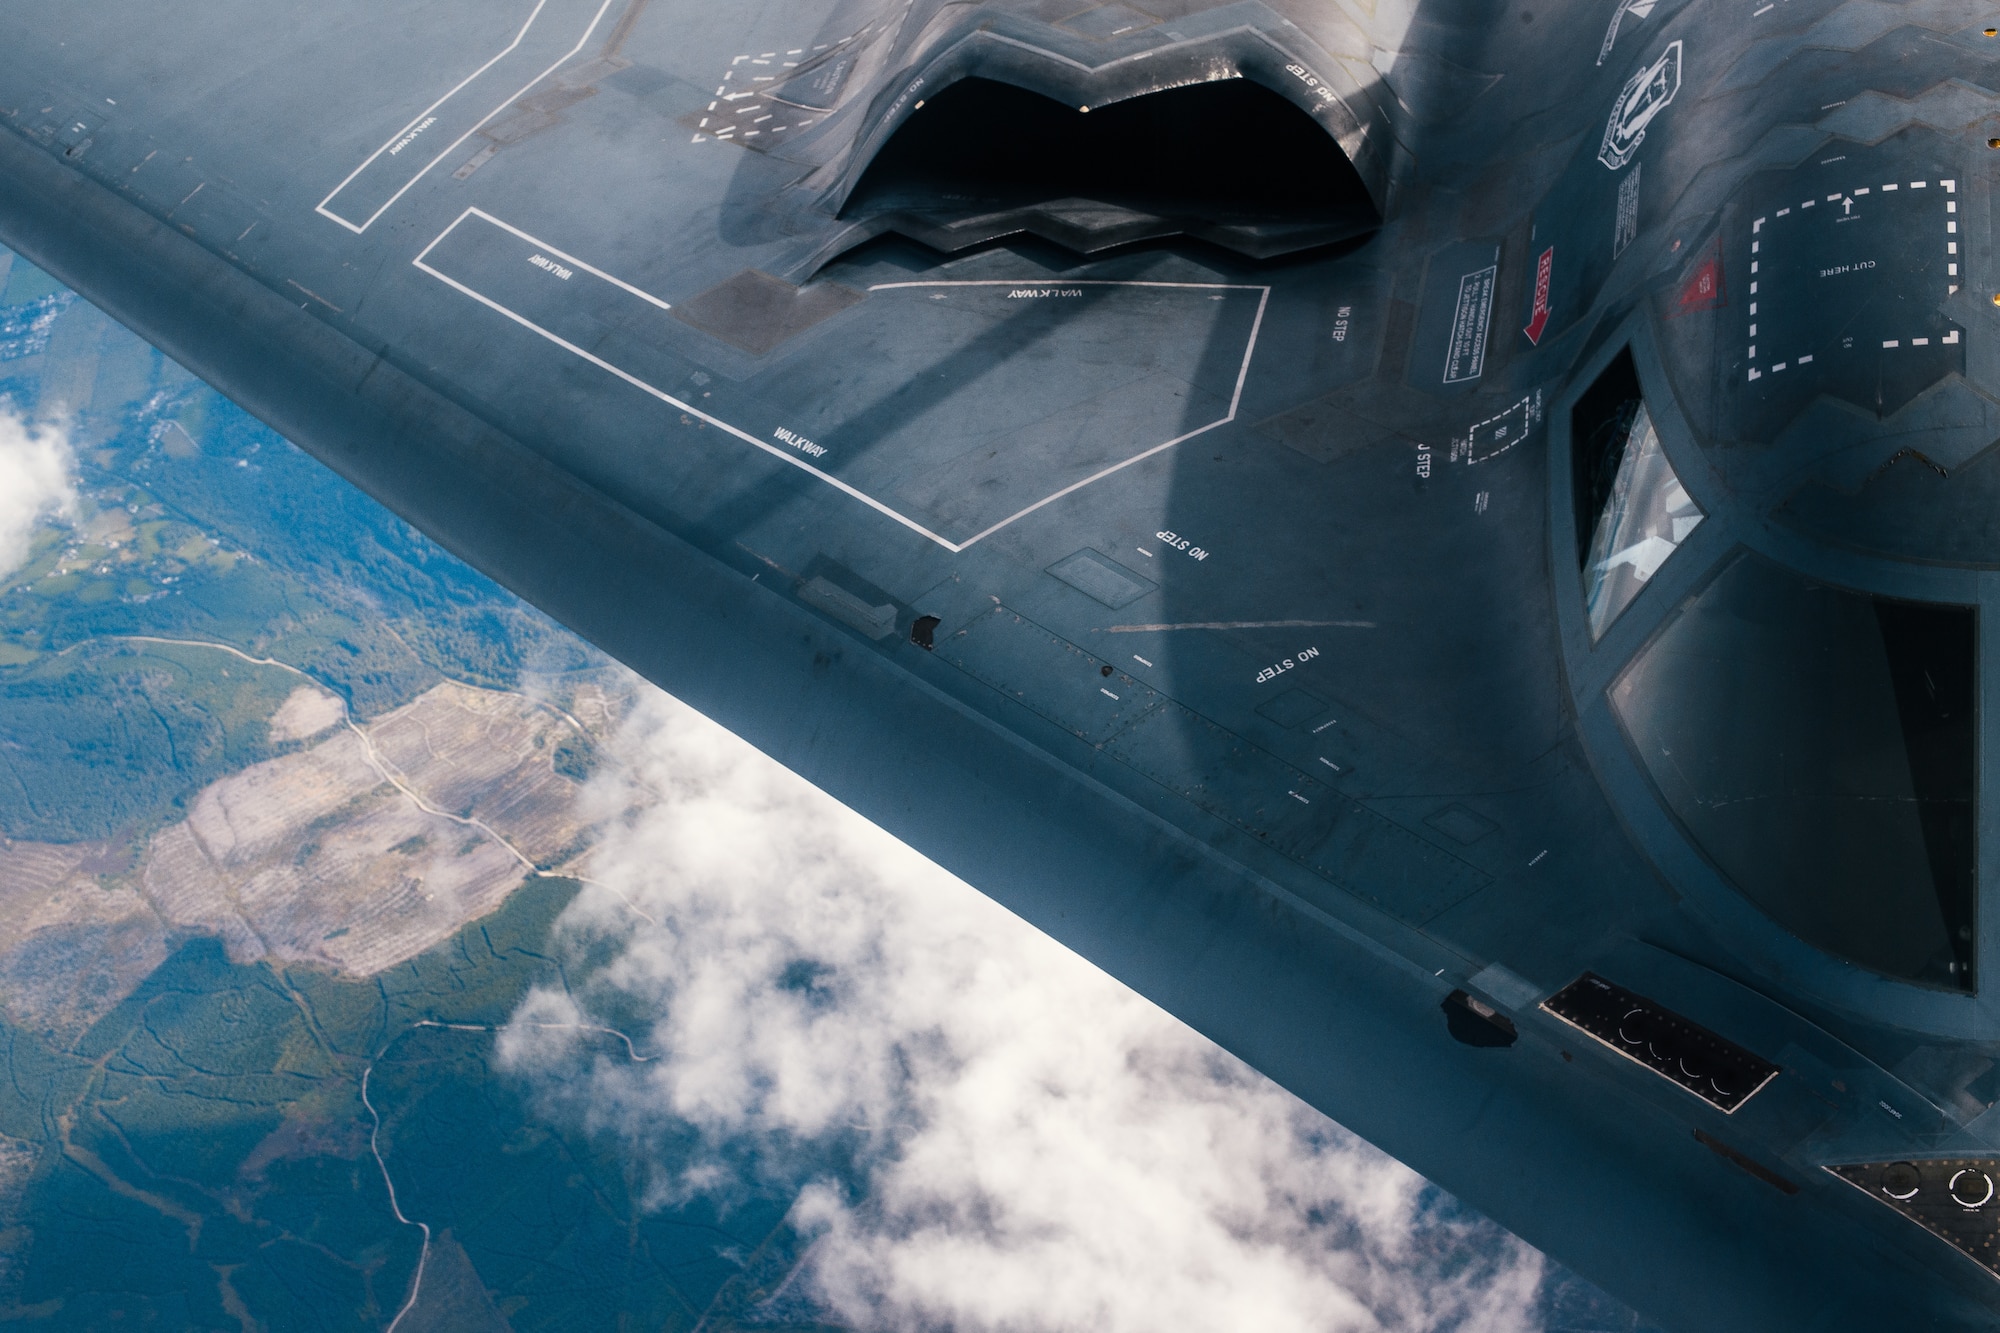 A U.S. Air Force 509th Bomb Wing B-2 Spirit refuels from a 351st Aerial Refueling Squadron KC-135 Stratotanker during the Bomber Task Force training exercise over England, Aug. 29, 2019.